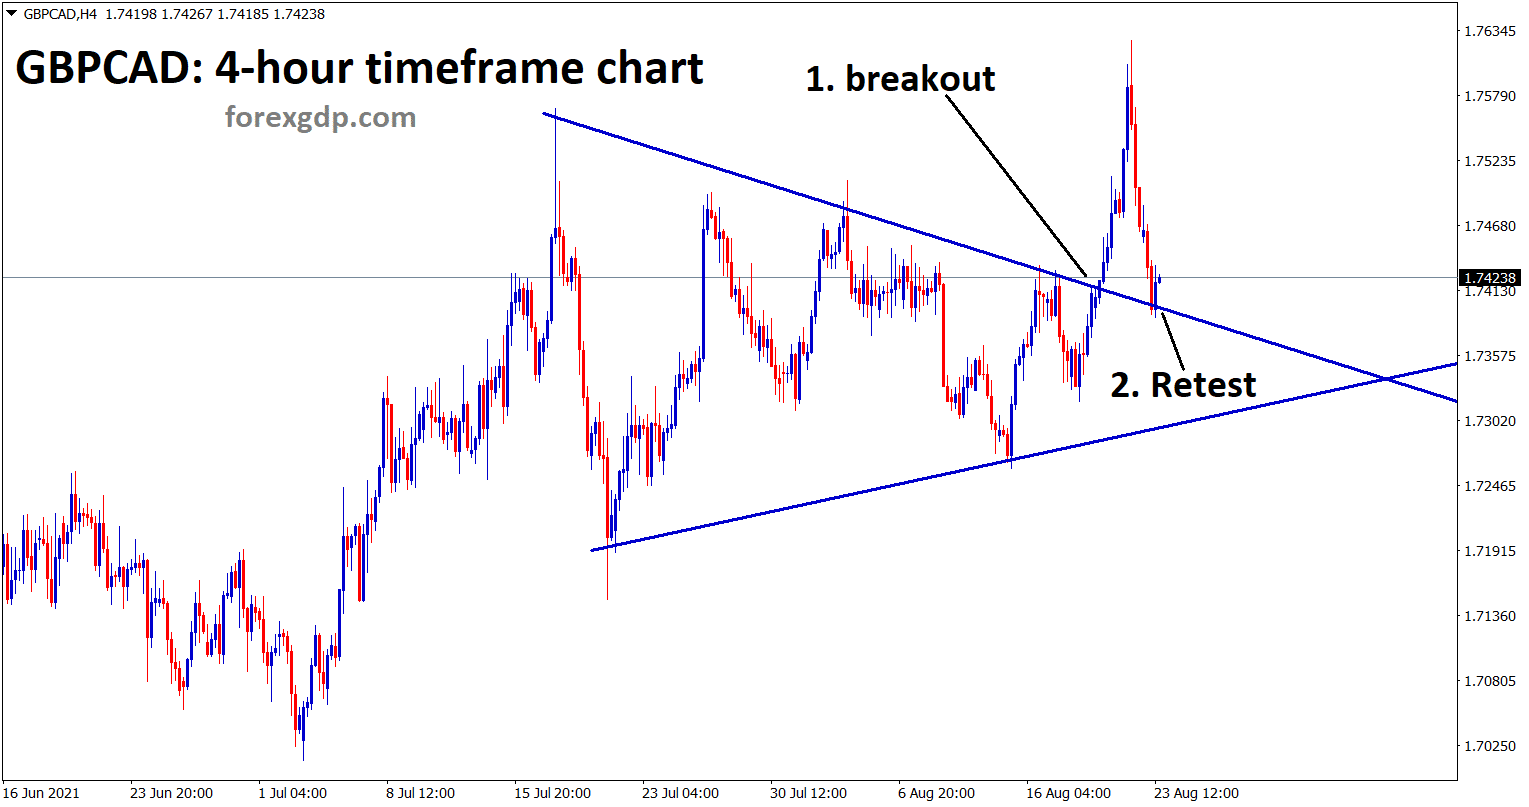 GBPCAD hits the retest area of the symmetrical Triangle pattern